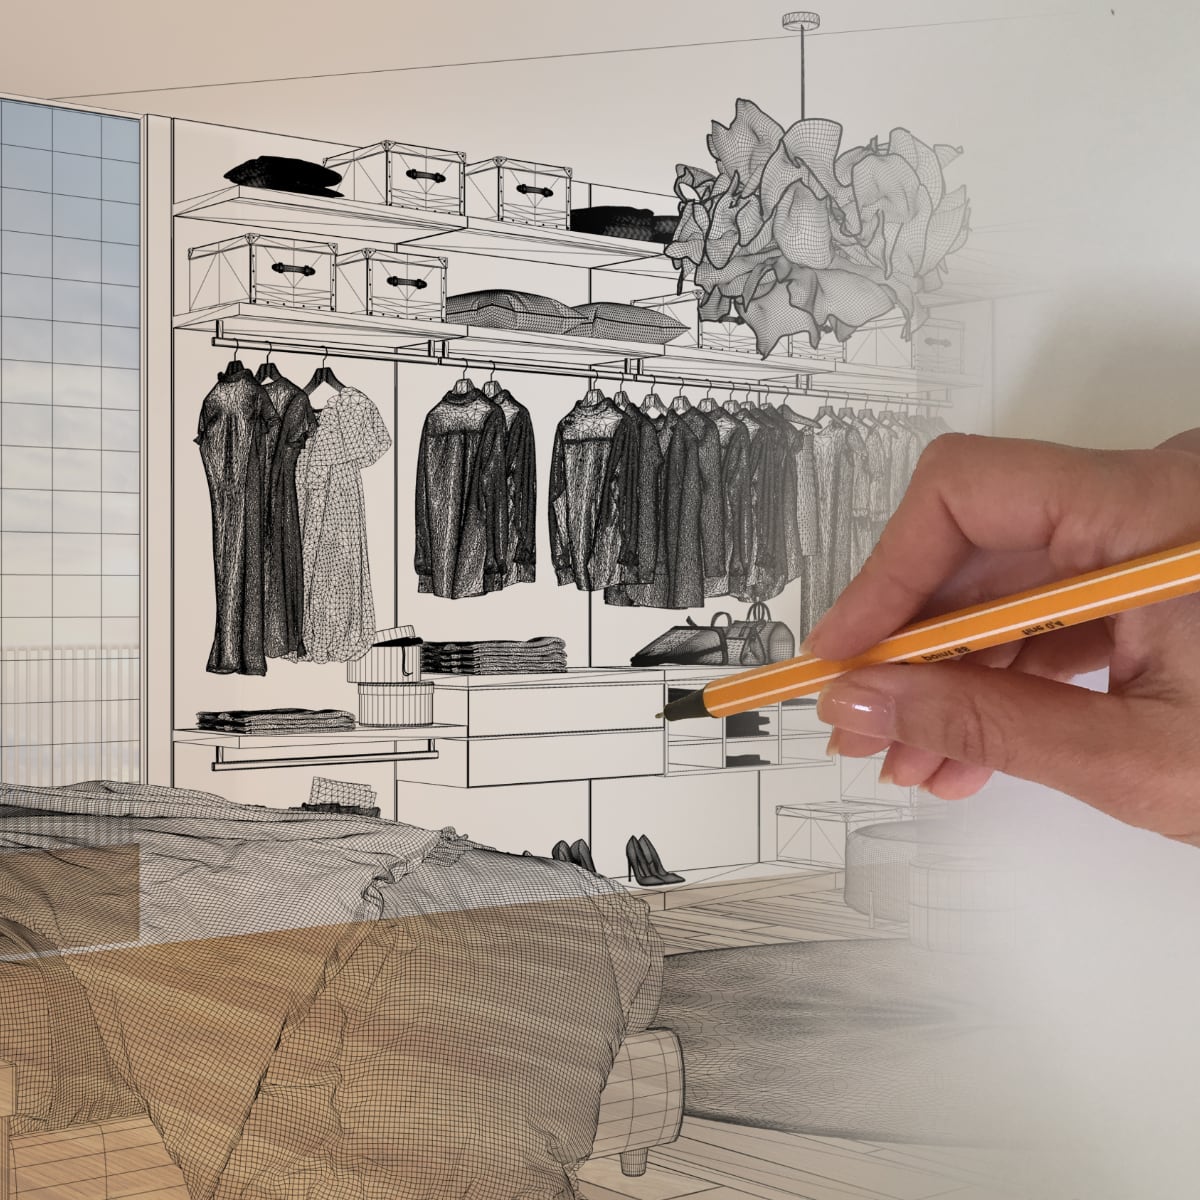 A hand with a pencil drawing a sketch of a closet design